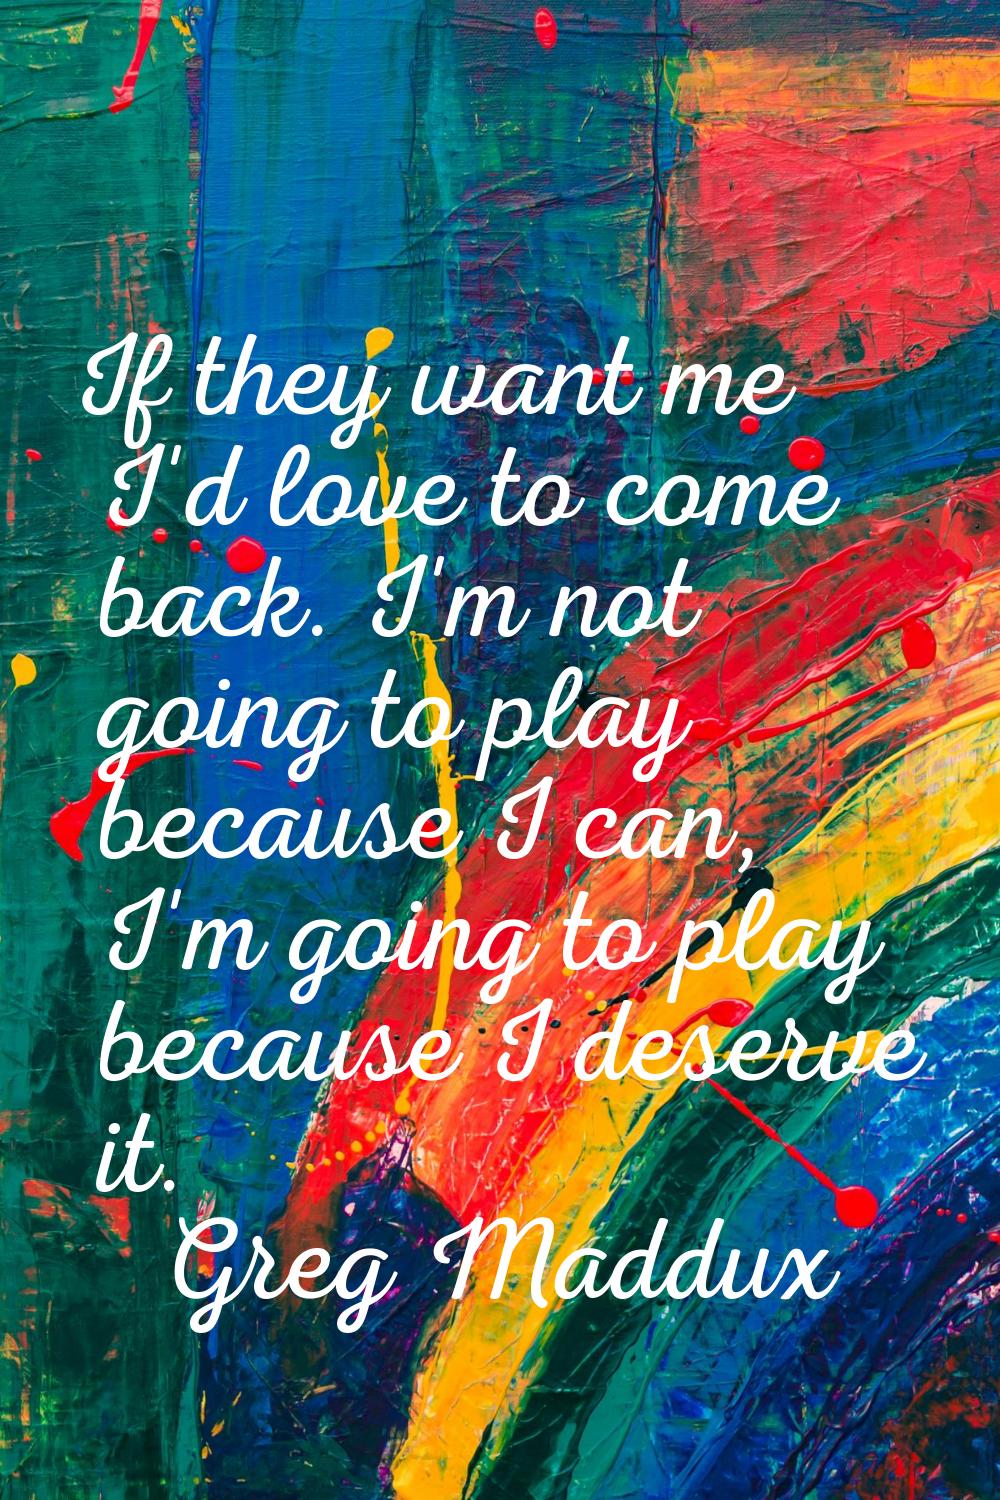 If they want me I'd love to come back. I'm not going to play because I can, I'm going to play becau